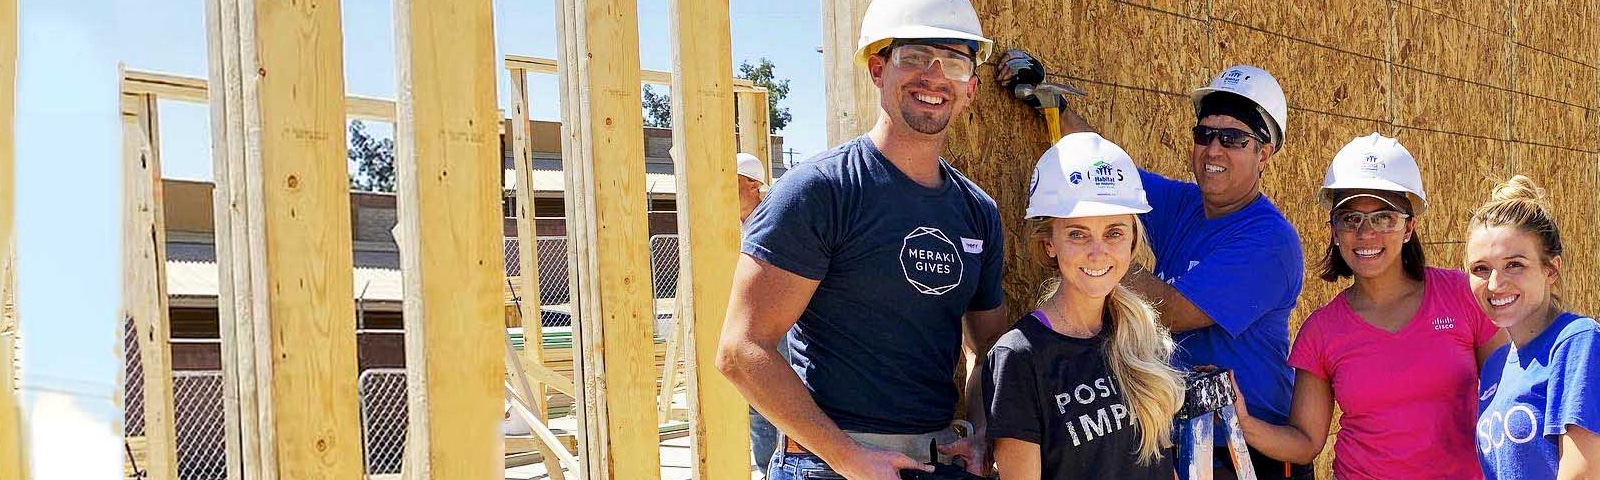 Five employees smiling wearing hard hats as they build a house for a team volunteer event